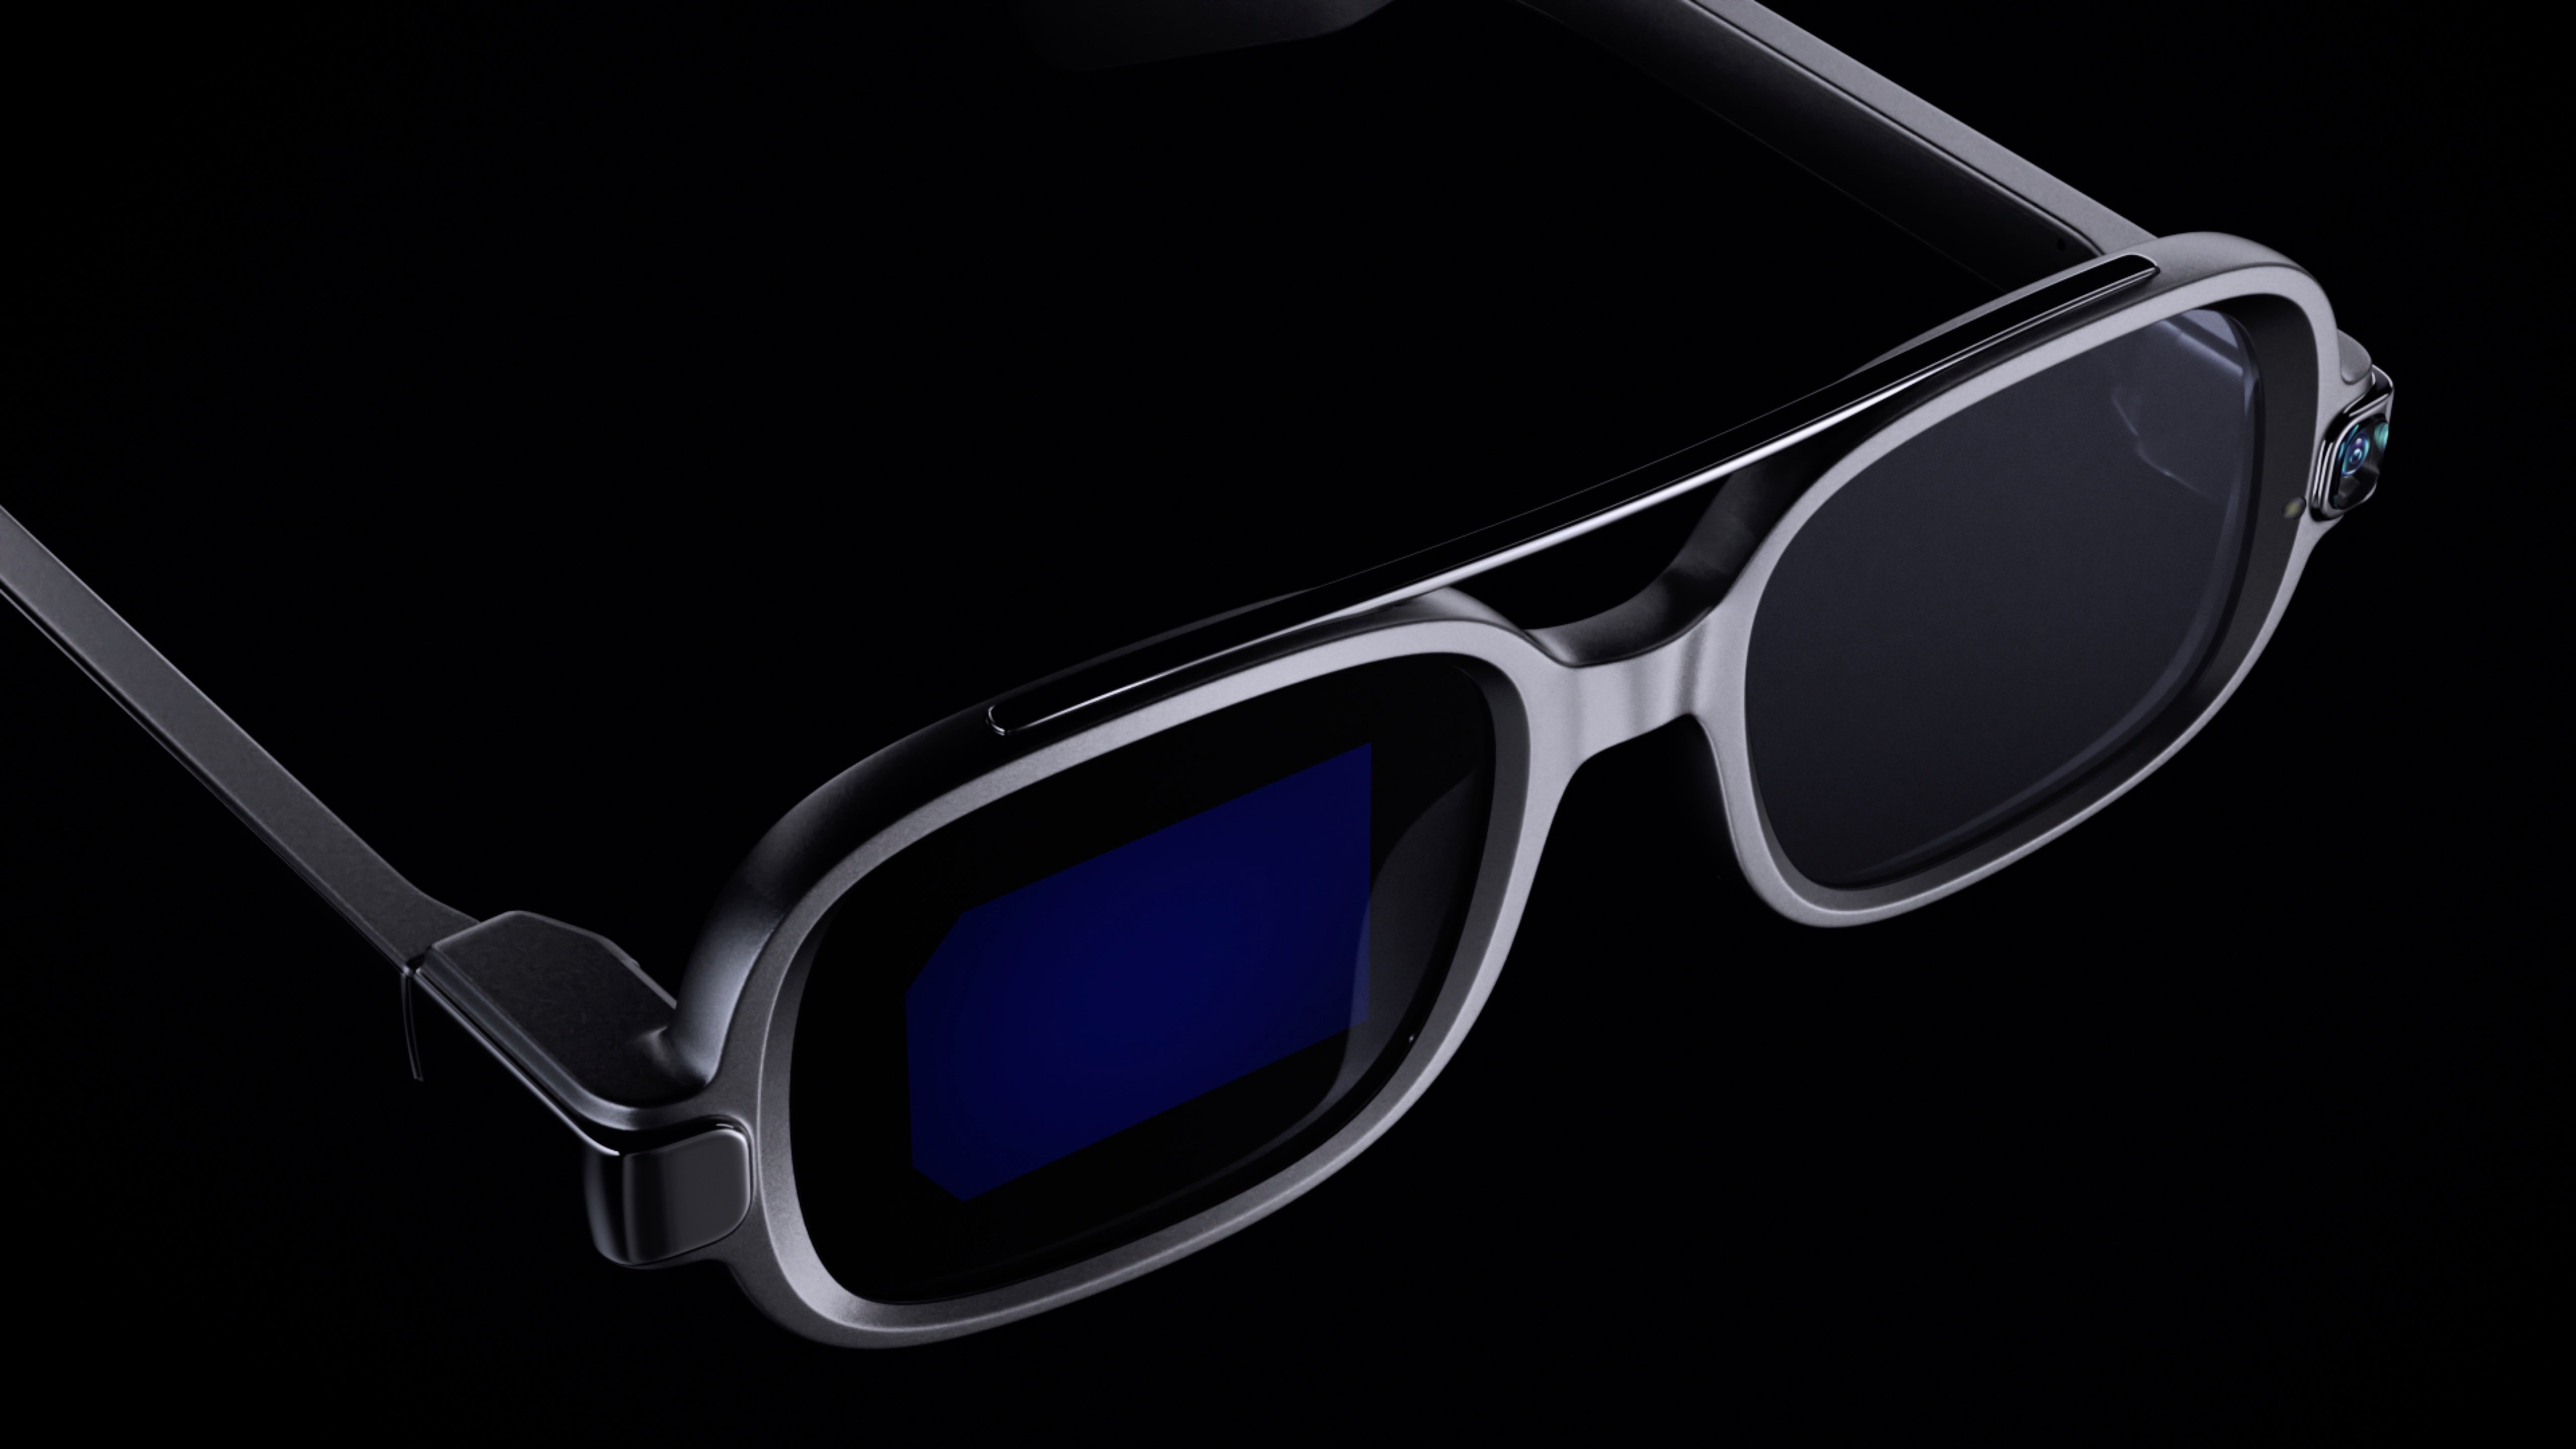 Xiaomi reveals Smart Glasses concept with a MicroLED display